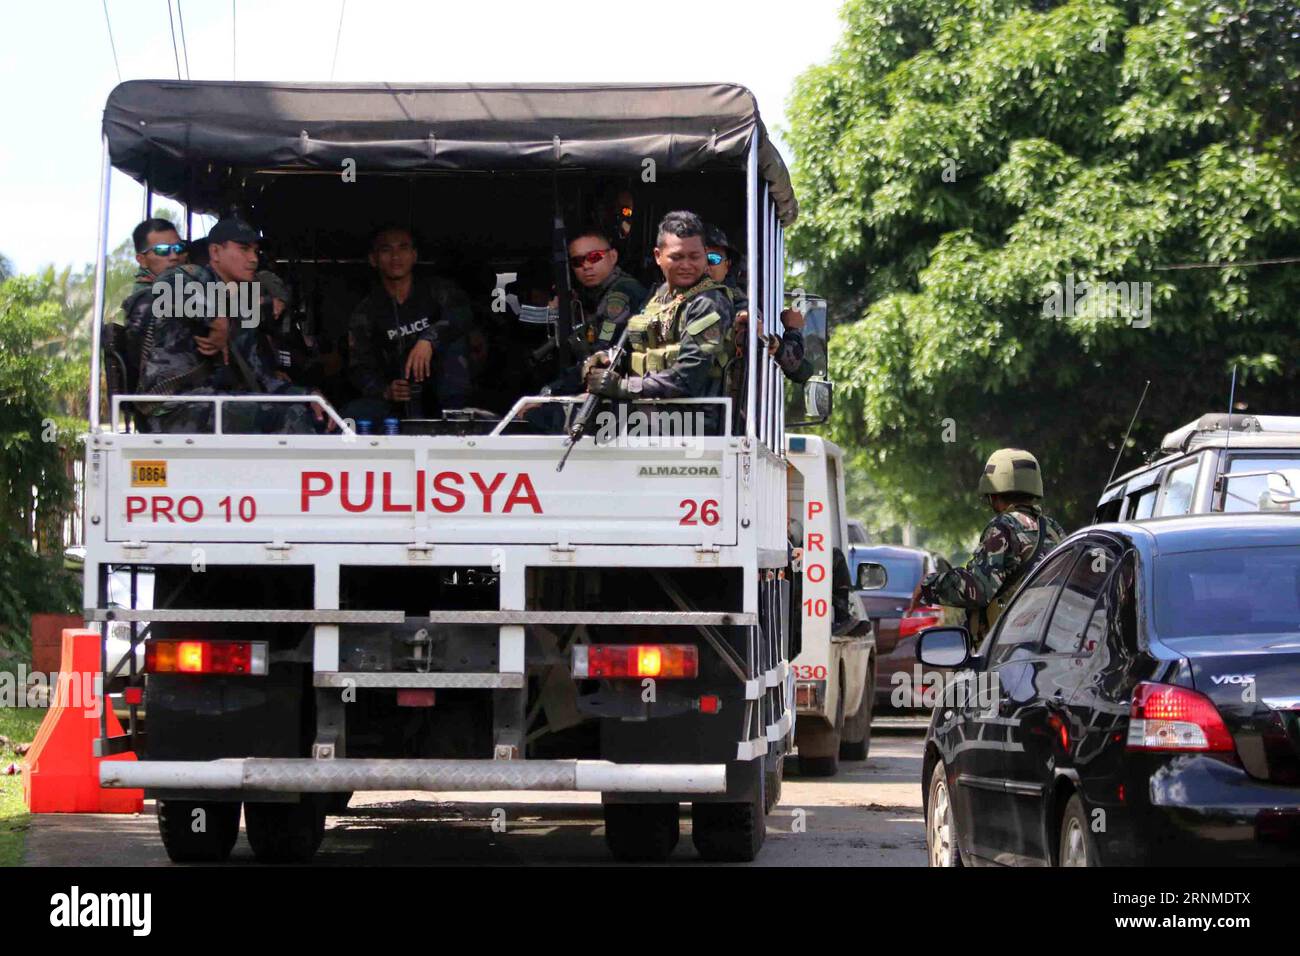 (170524) -- LANAO DEL SUR, May 24, 2017 -- Members of the Philippine National Police-Special Action Force (PNP-SAF) are deployed at a checkpoint in Lanao Del Sur Province, the Philippines, May 24, 2017. Philippine President Rodrigo Duterte said Wednesday he is mulling placing the Visayas region in the central Philippines under martial law after declaring Mindanao under martial law. ) (zy) PHILIPPINES-LANAO DEL SUR-CLASHES-MARTIAL LAW STRINGER PUBLICATIONxNOTxINxCHN   Lanao Del sur May 24 2017 Members of The Philippine National Police Special Action Force PNP SAF are Deployed AT a Checkpoint in Stock Photo